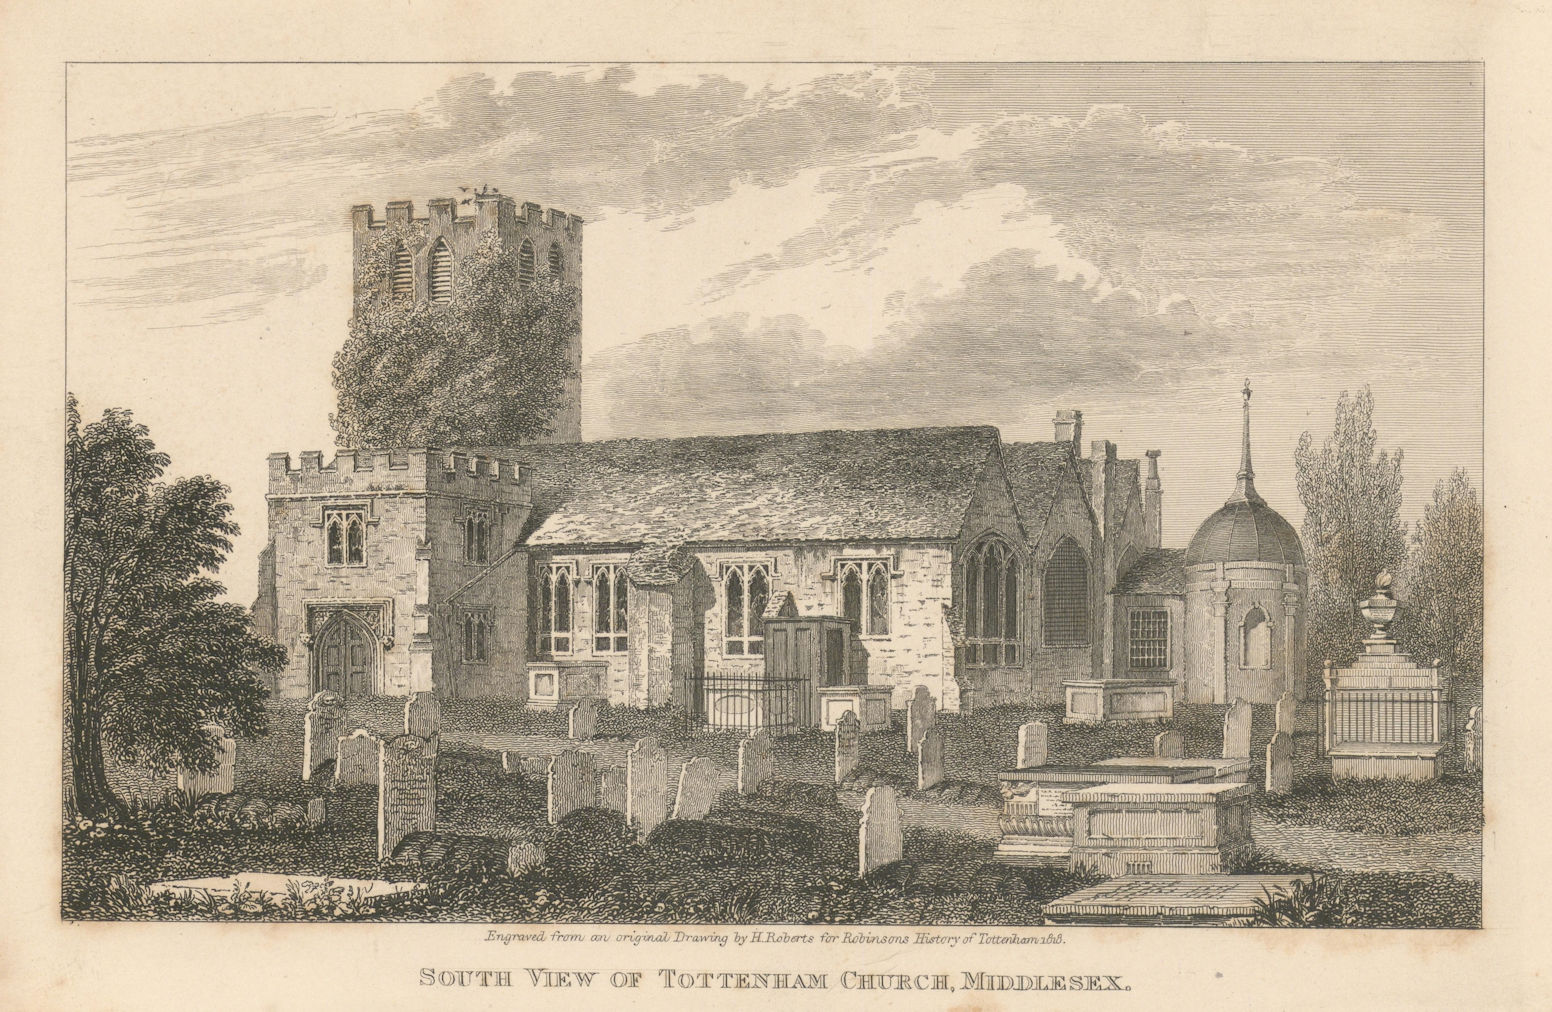 Associate Product South View of All Hallows Church, Tottenham, London 1840 old antique print